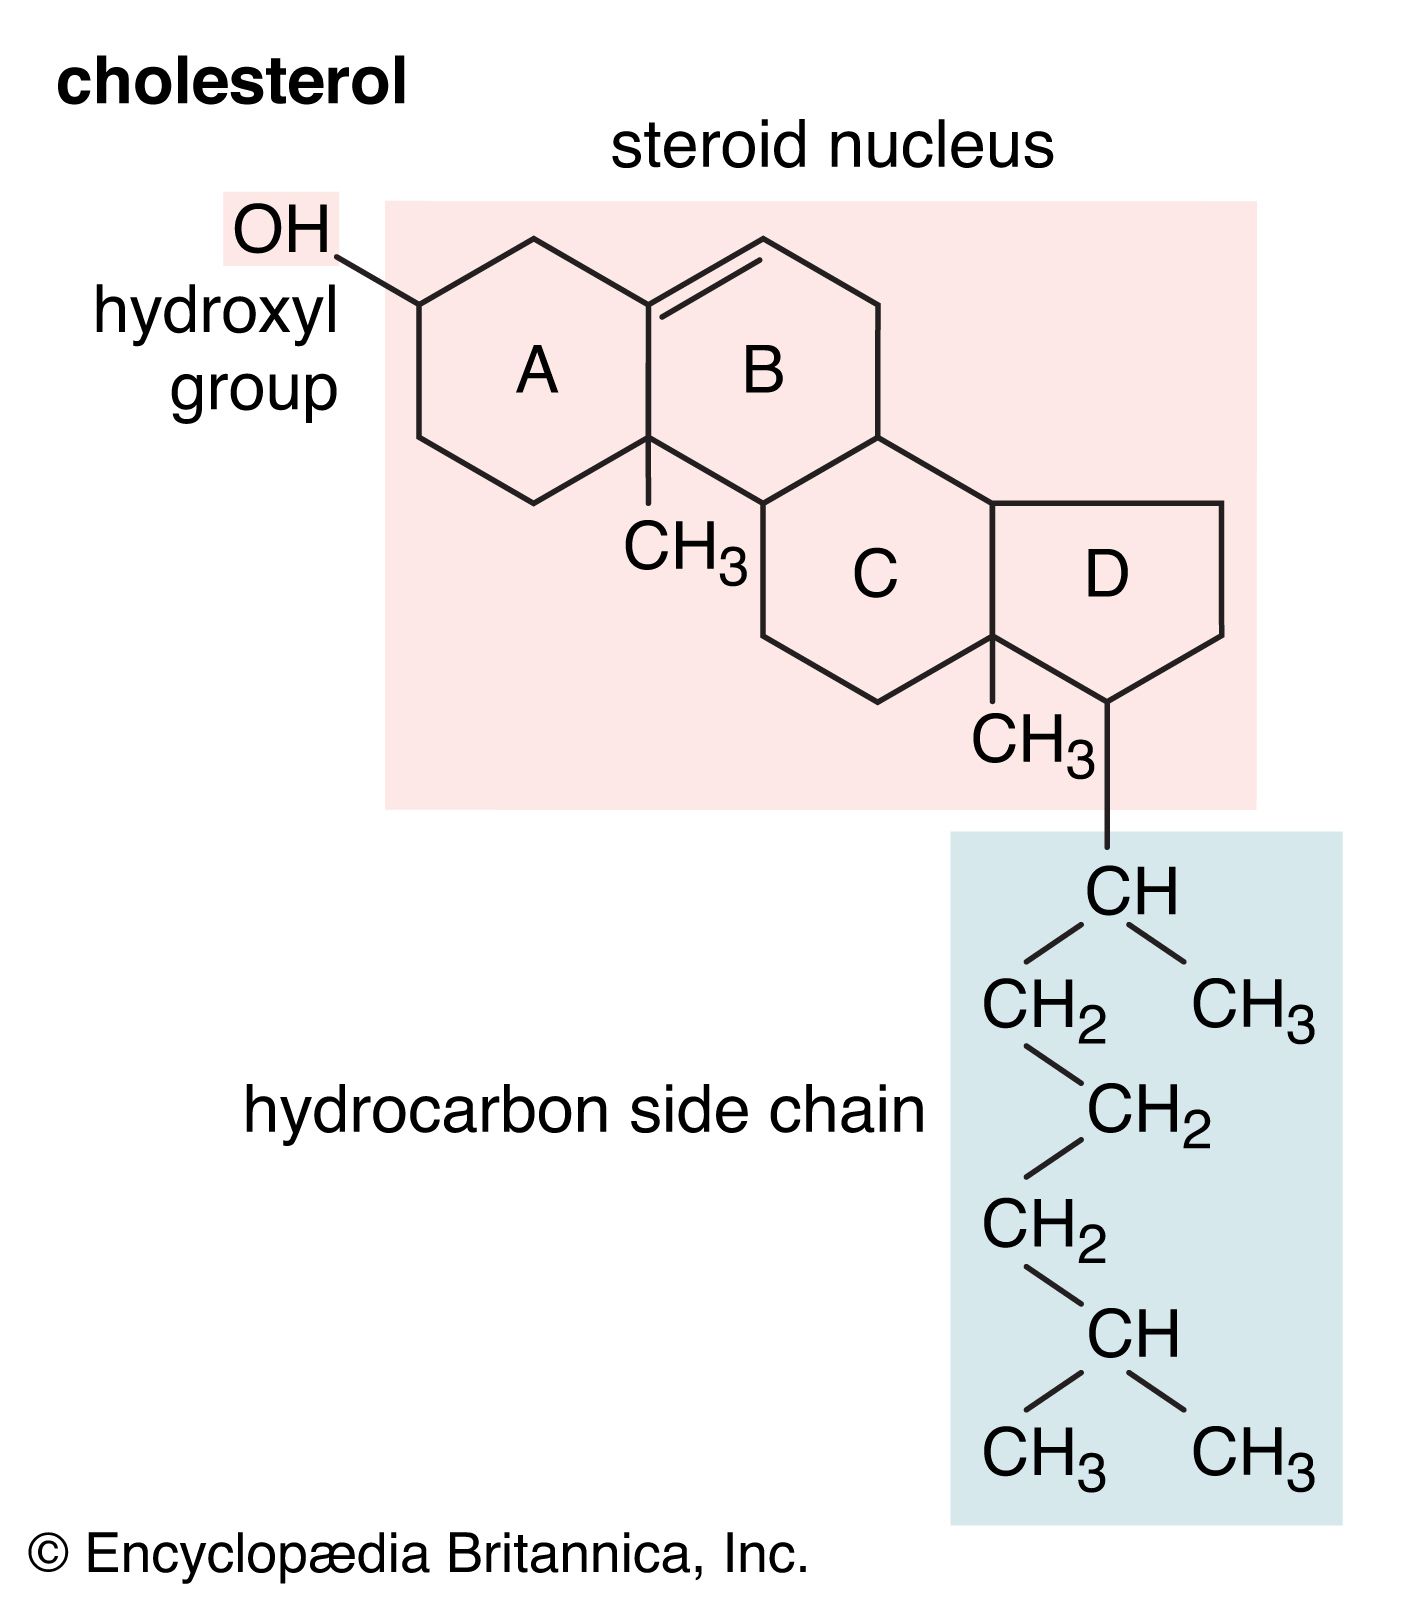 is cholesterol a steroid